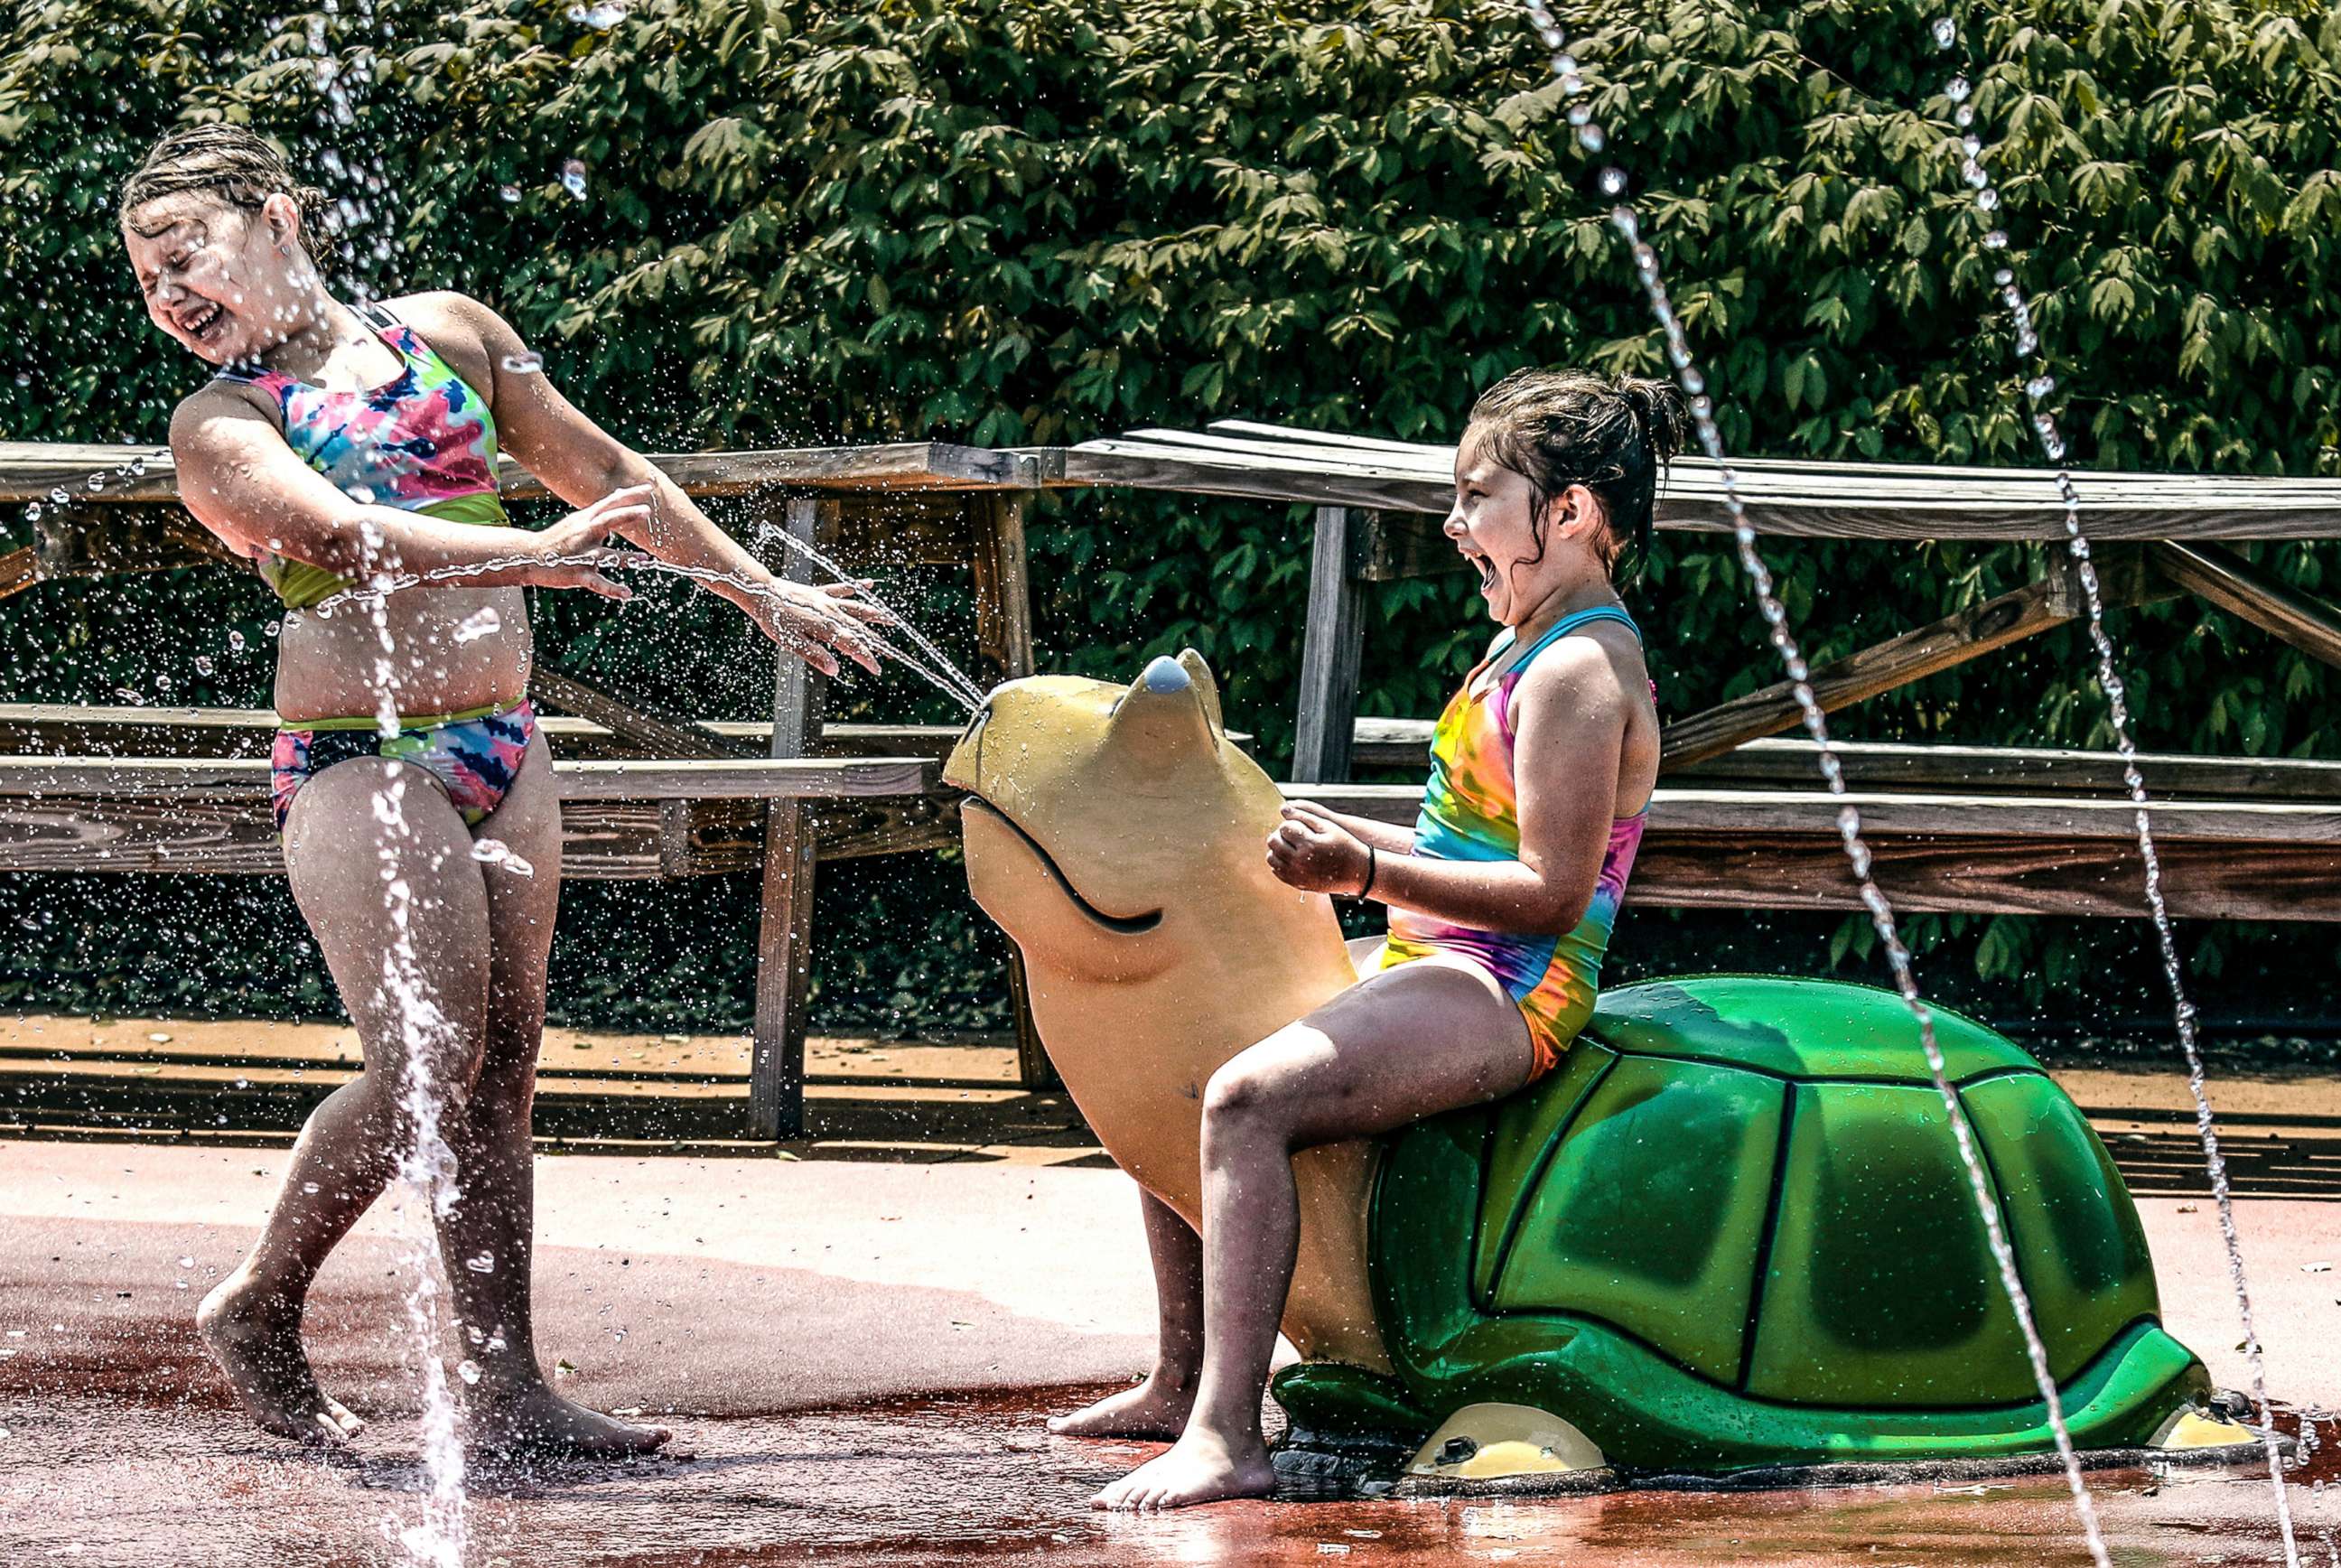 PHOTO: Jemma Velotta, 7, left, and her sister Mya, 8, cool off in the heat at the spray park, July 6, 2022, in Owensboro, Ky.